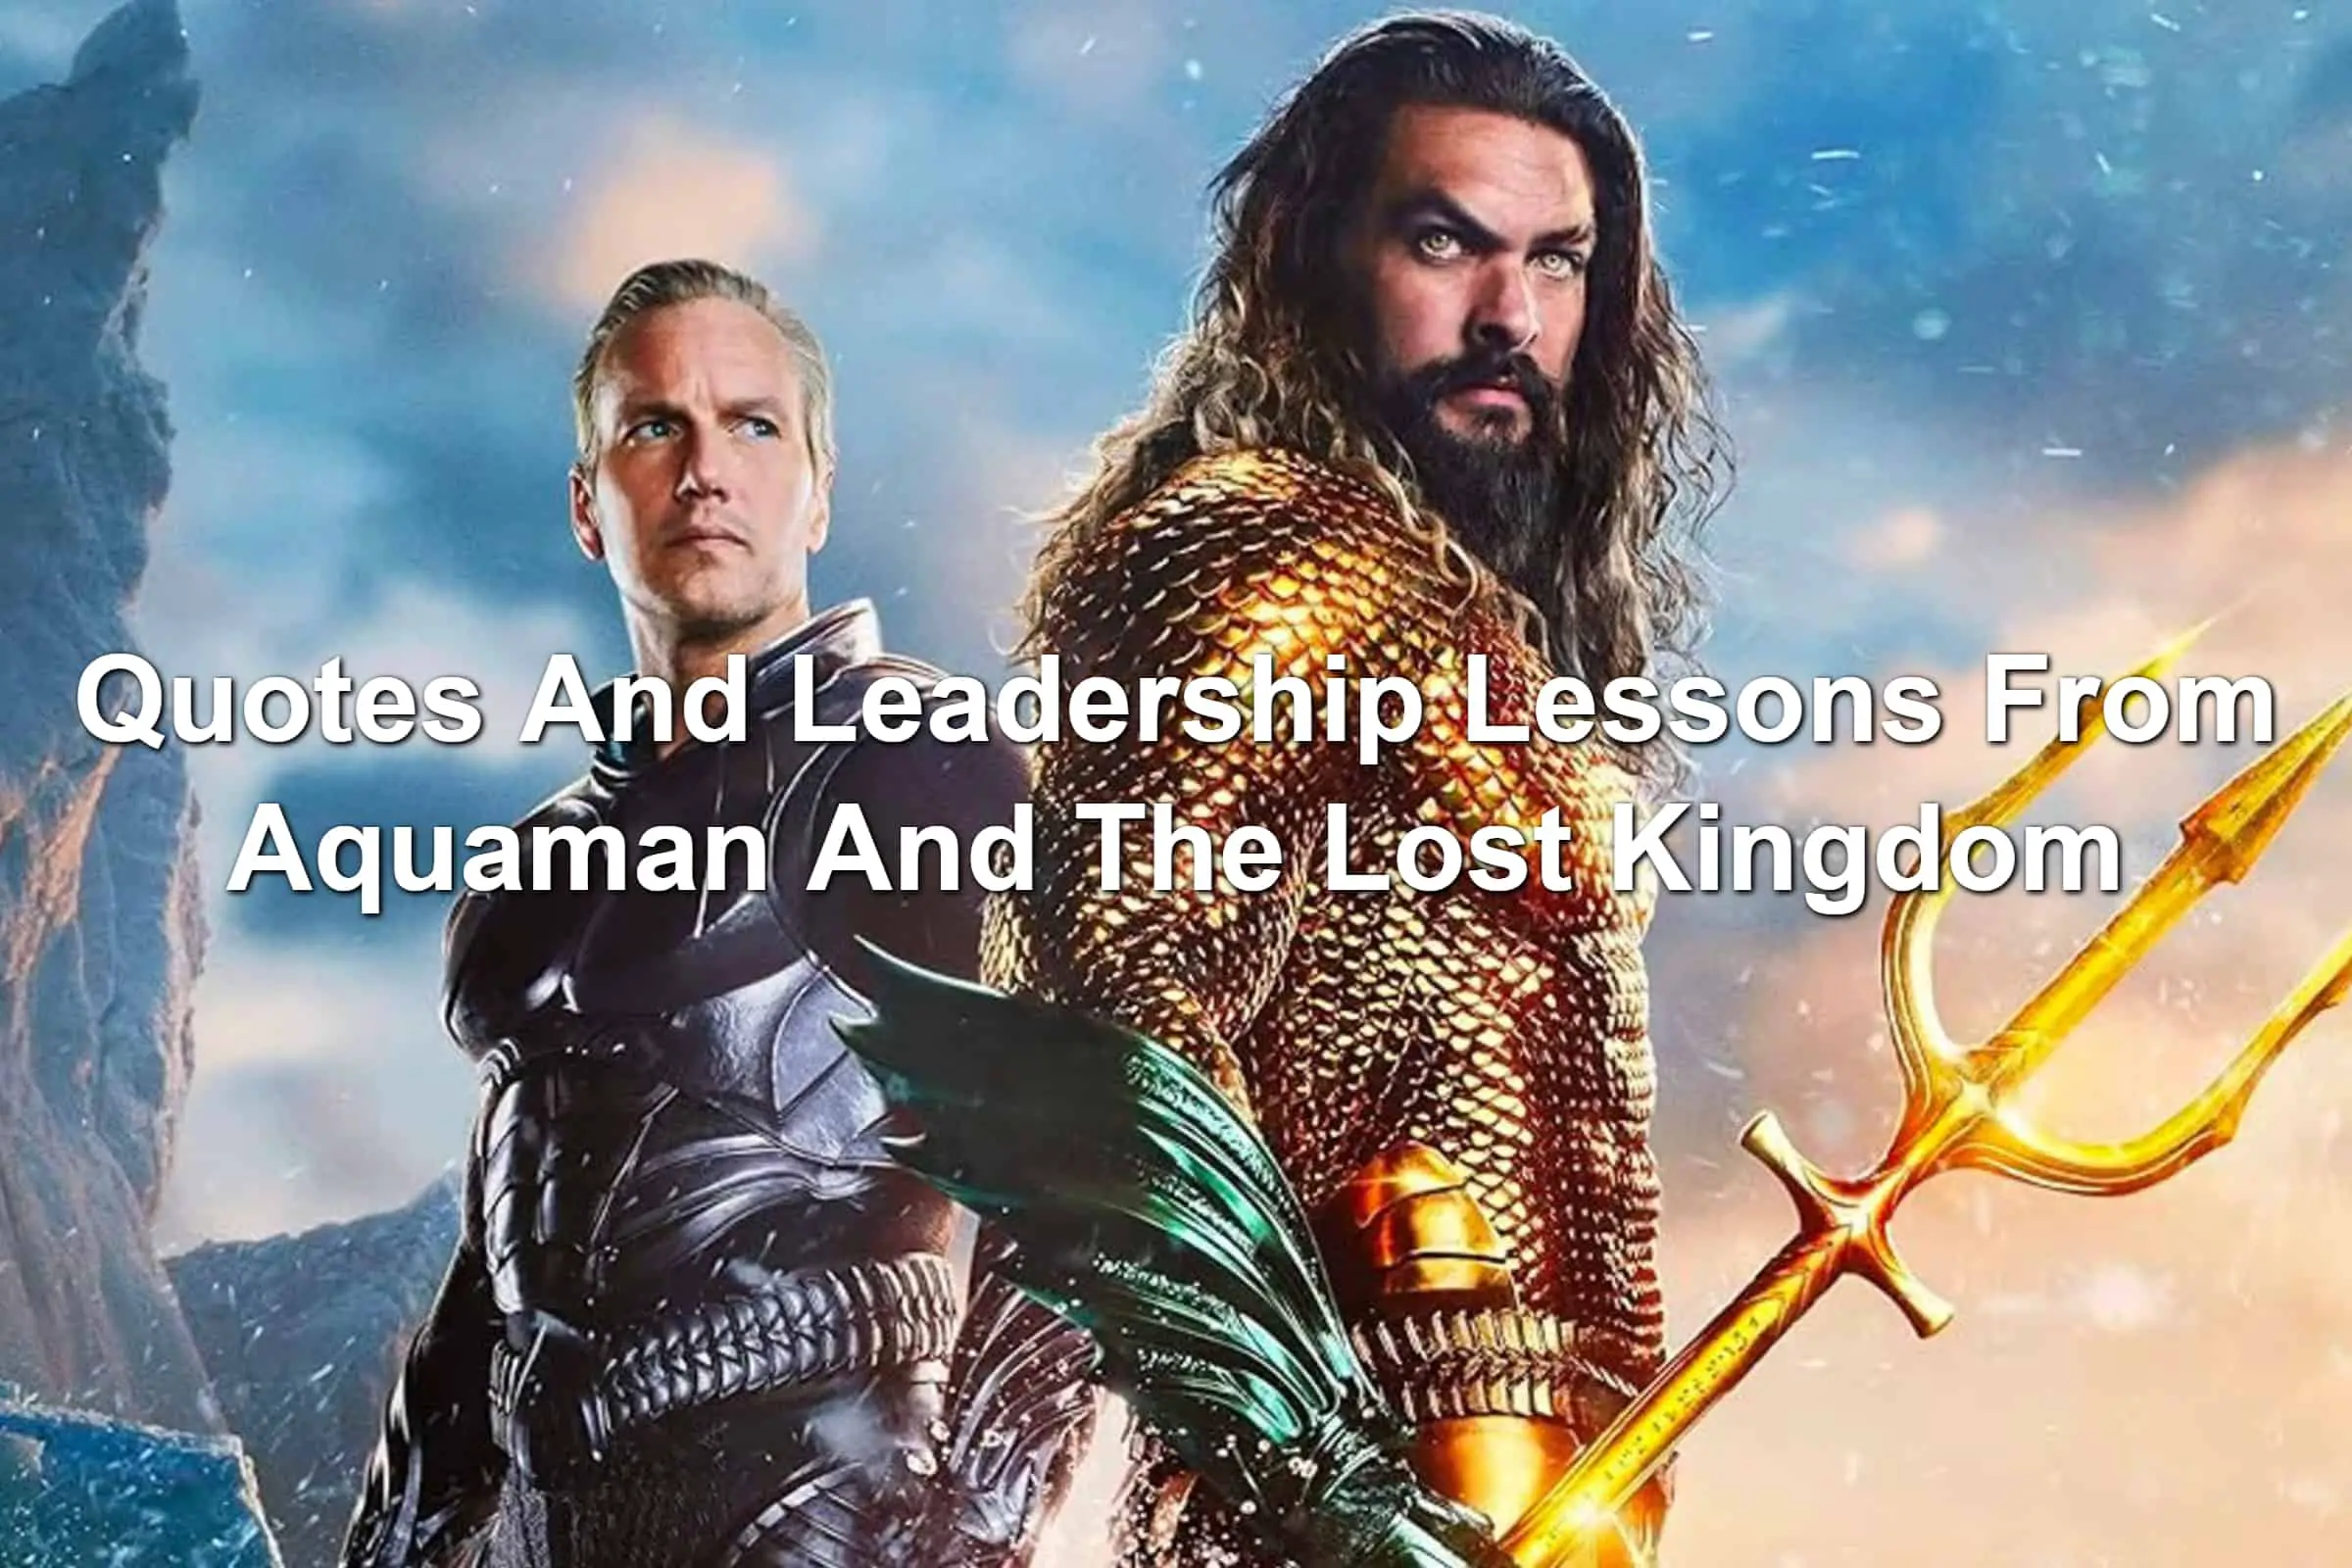 King Orm and Aquaman standing back to back with a blue background. Aquaman 2 Aquaman And The Lost Kingdom